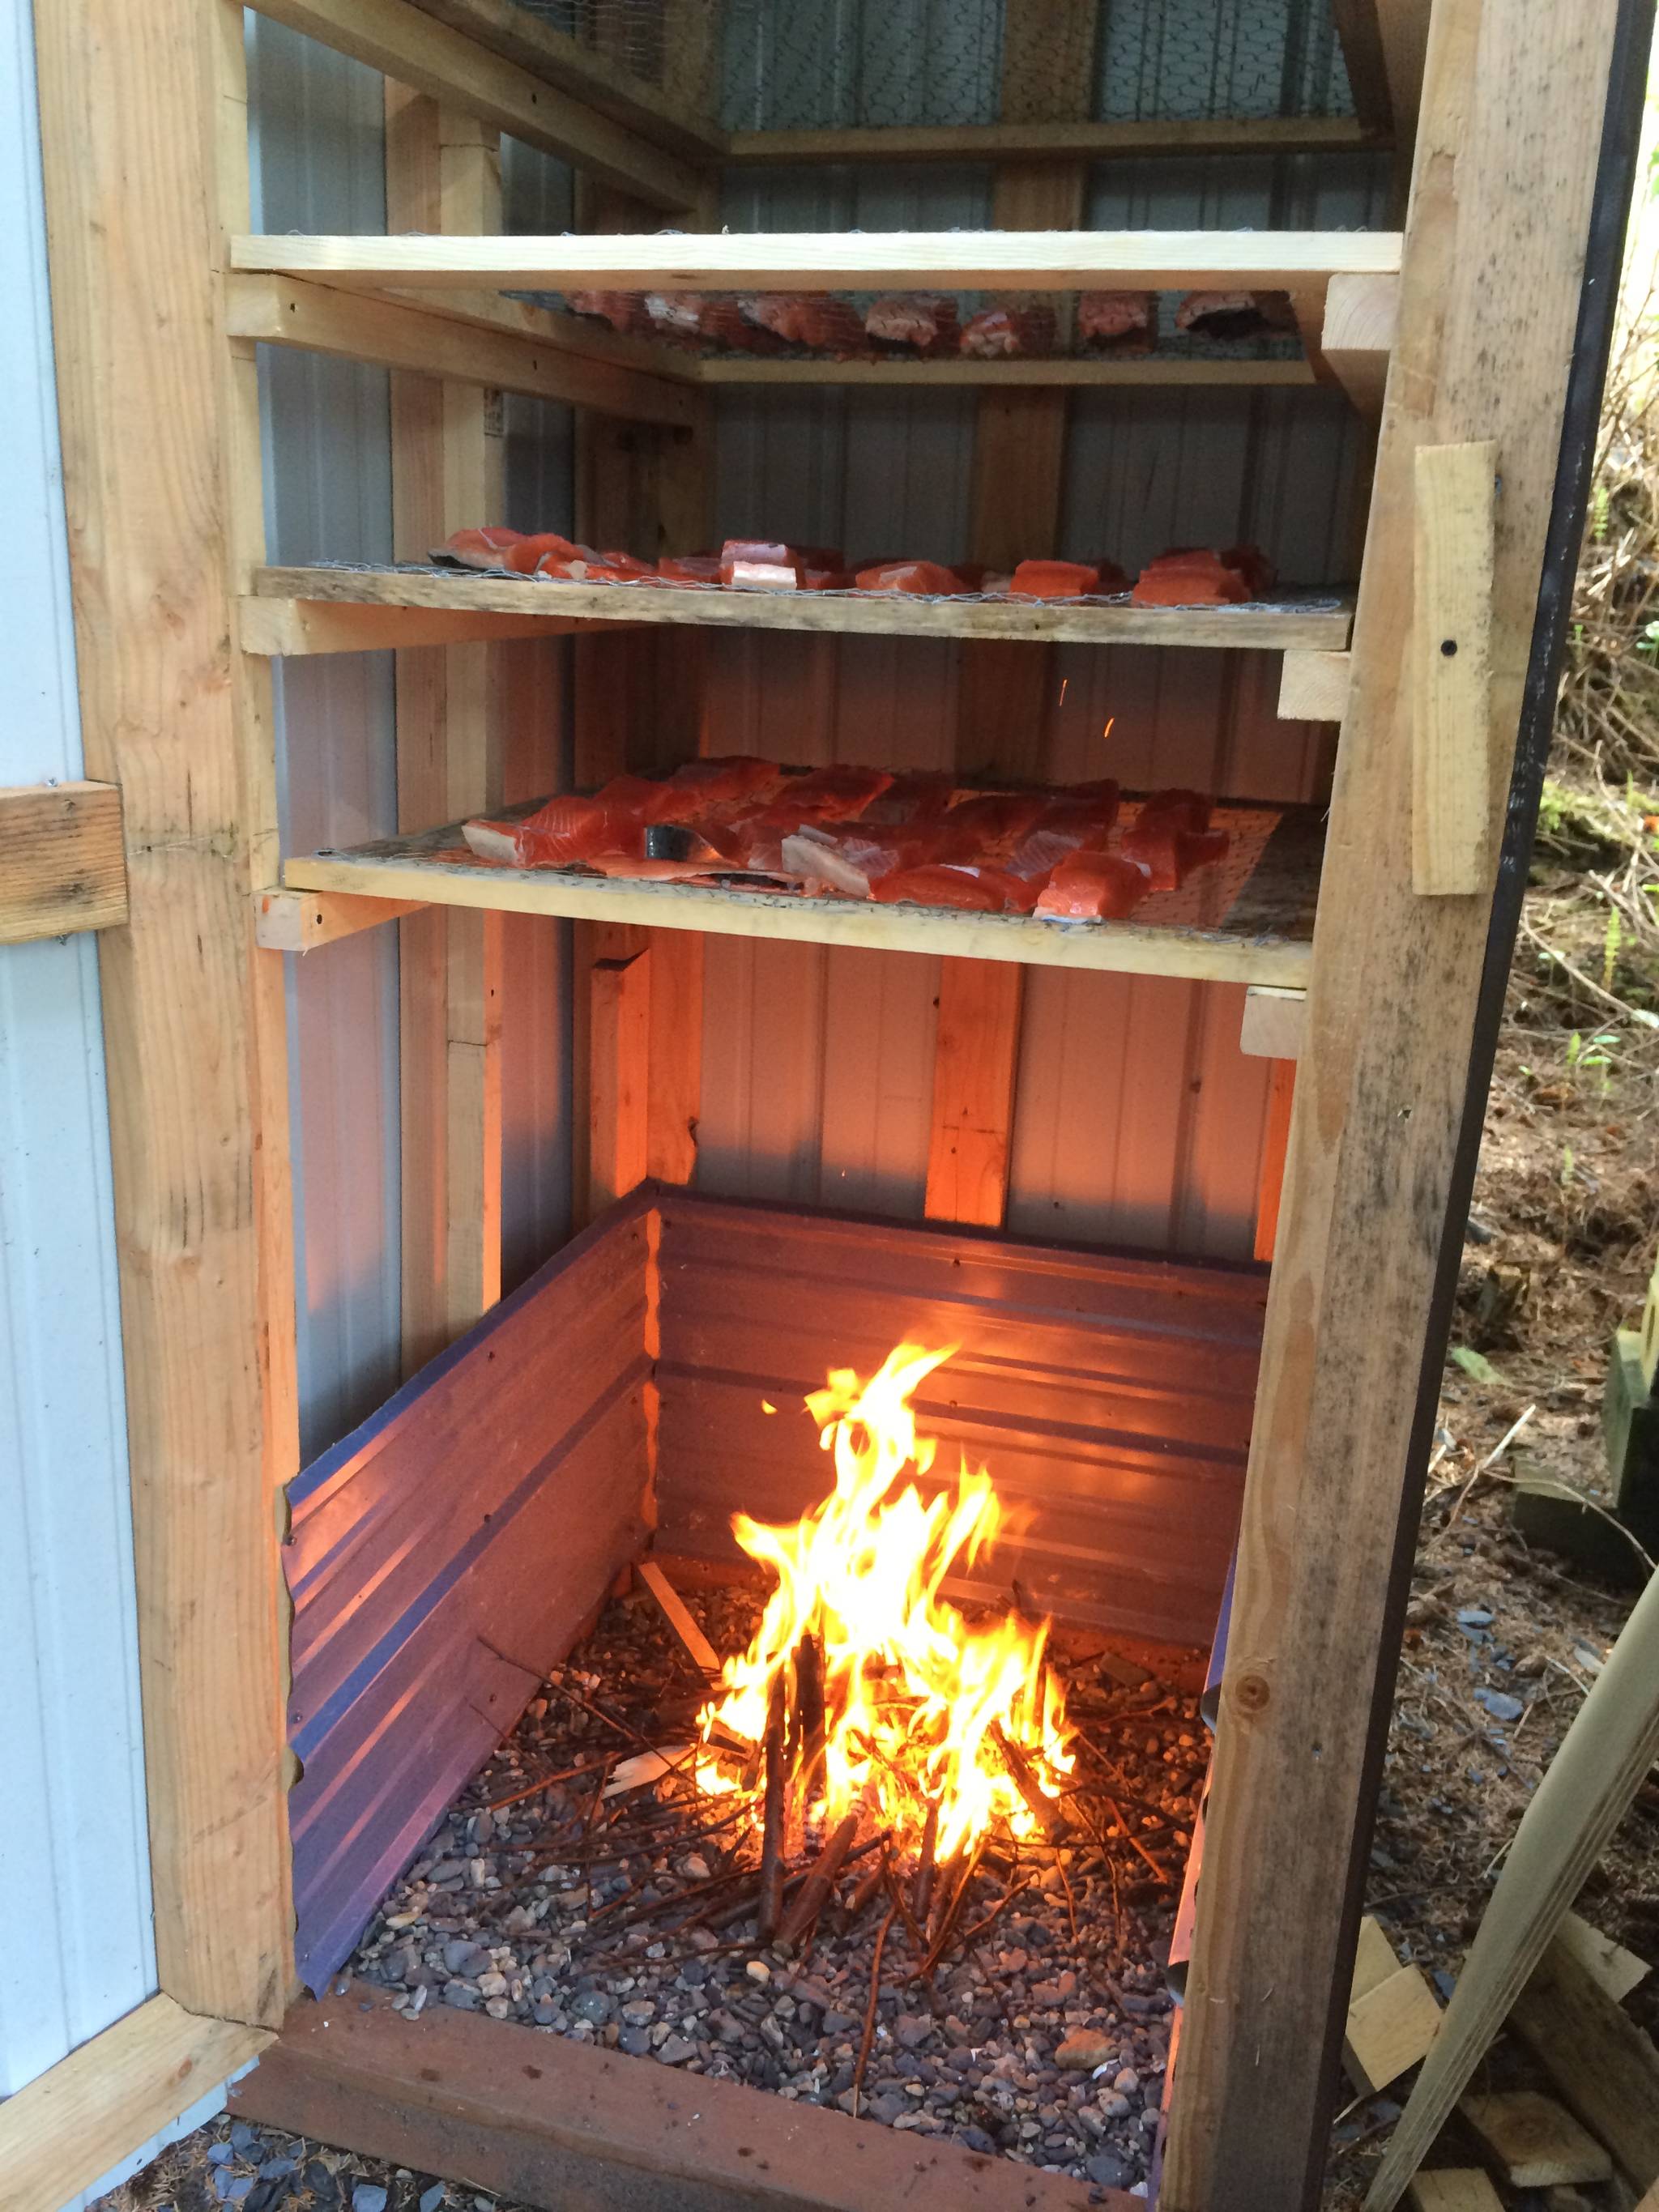 Starting the fire inside the smokehouse. Vivian Faith Prescott | For the Capital City Weekly